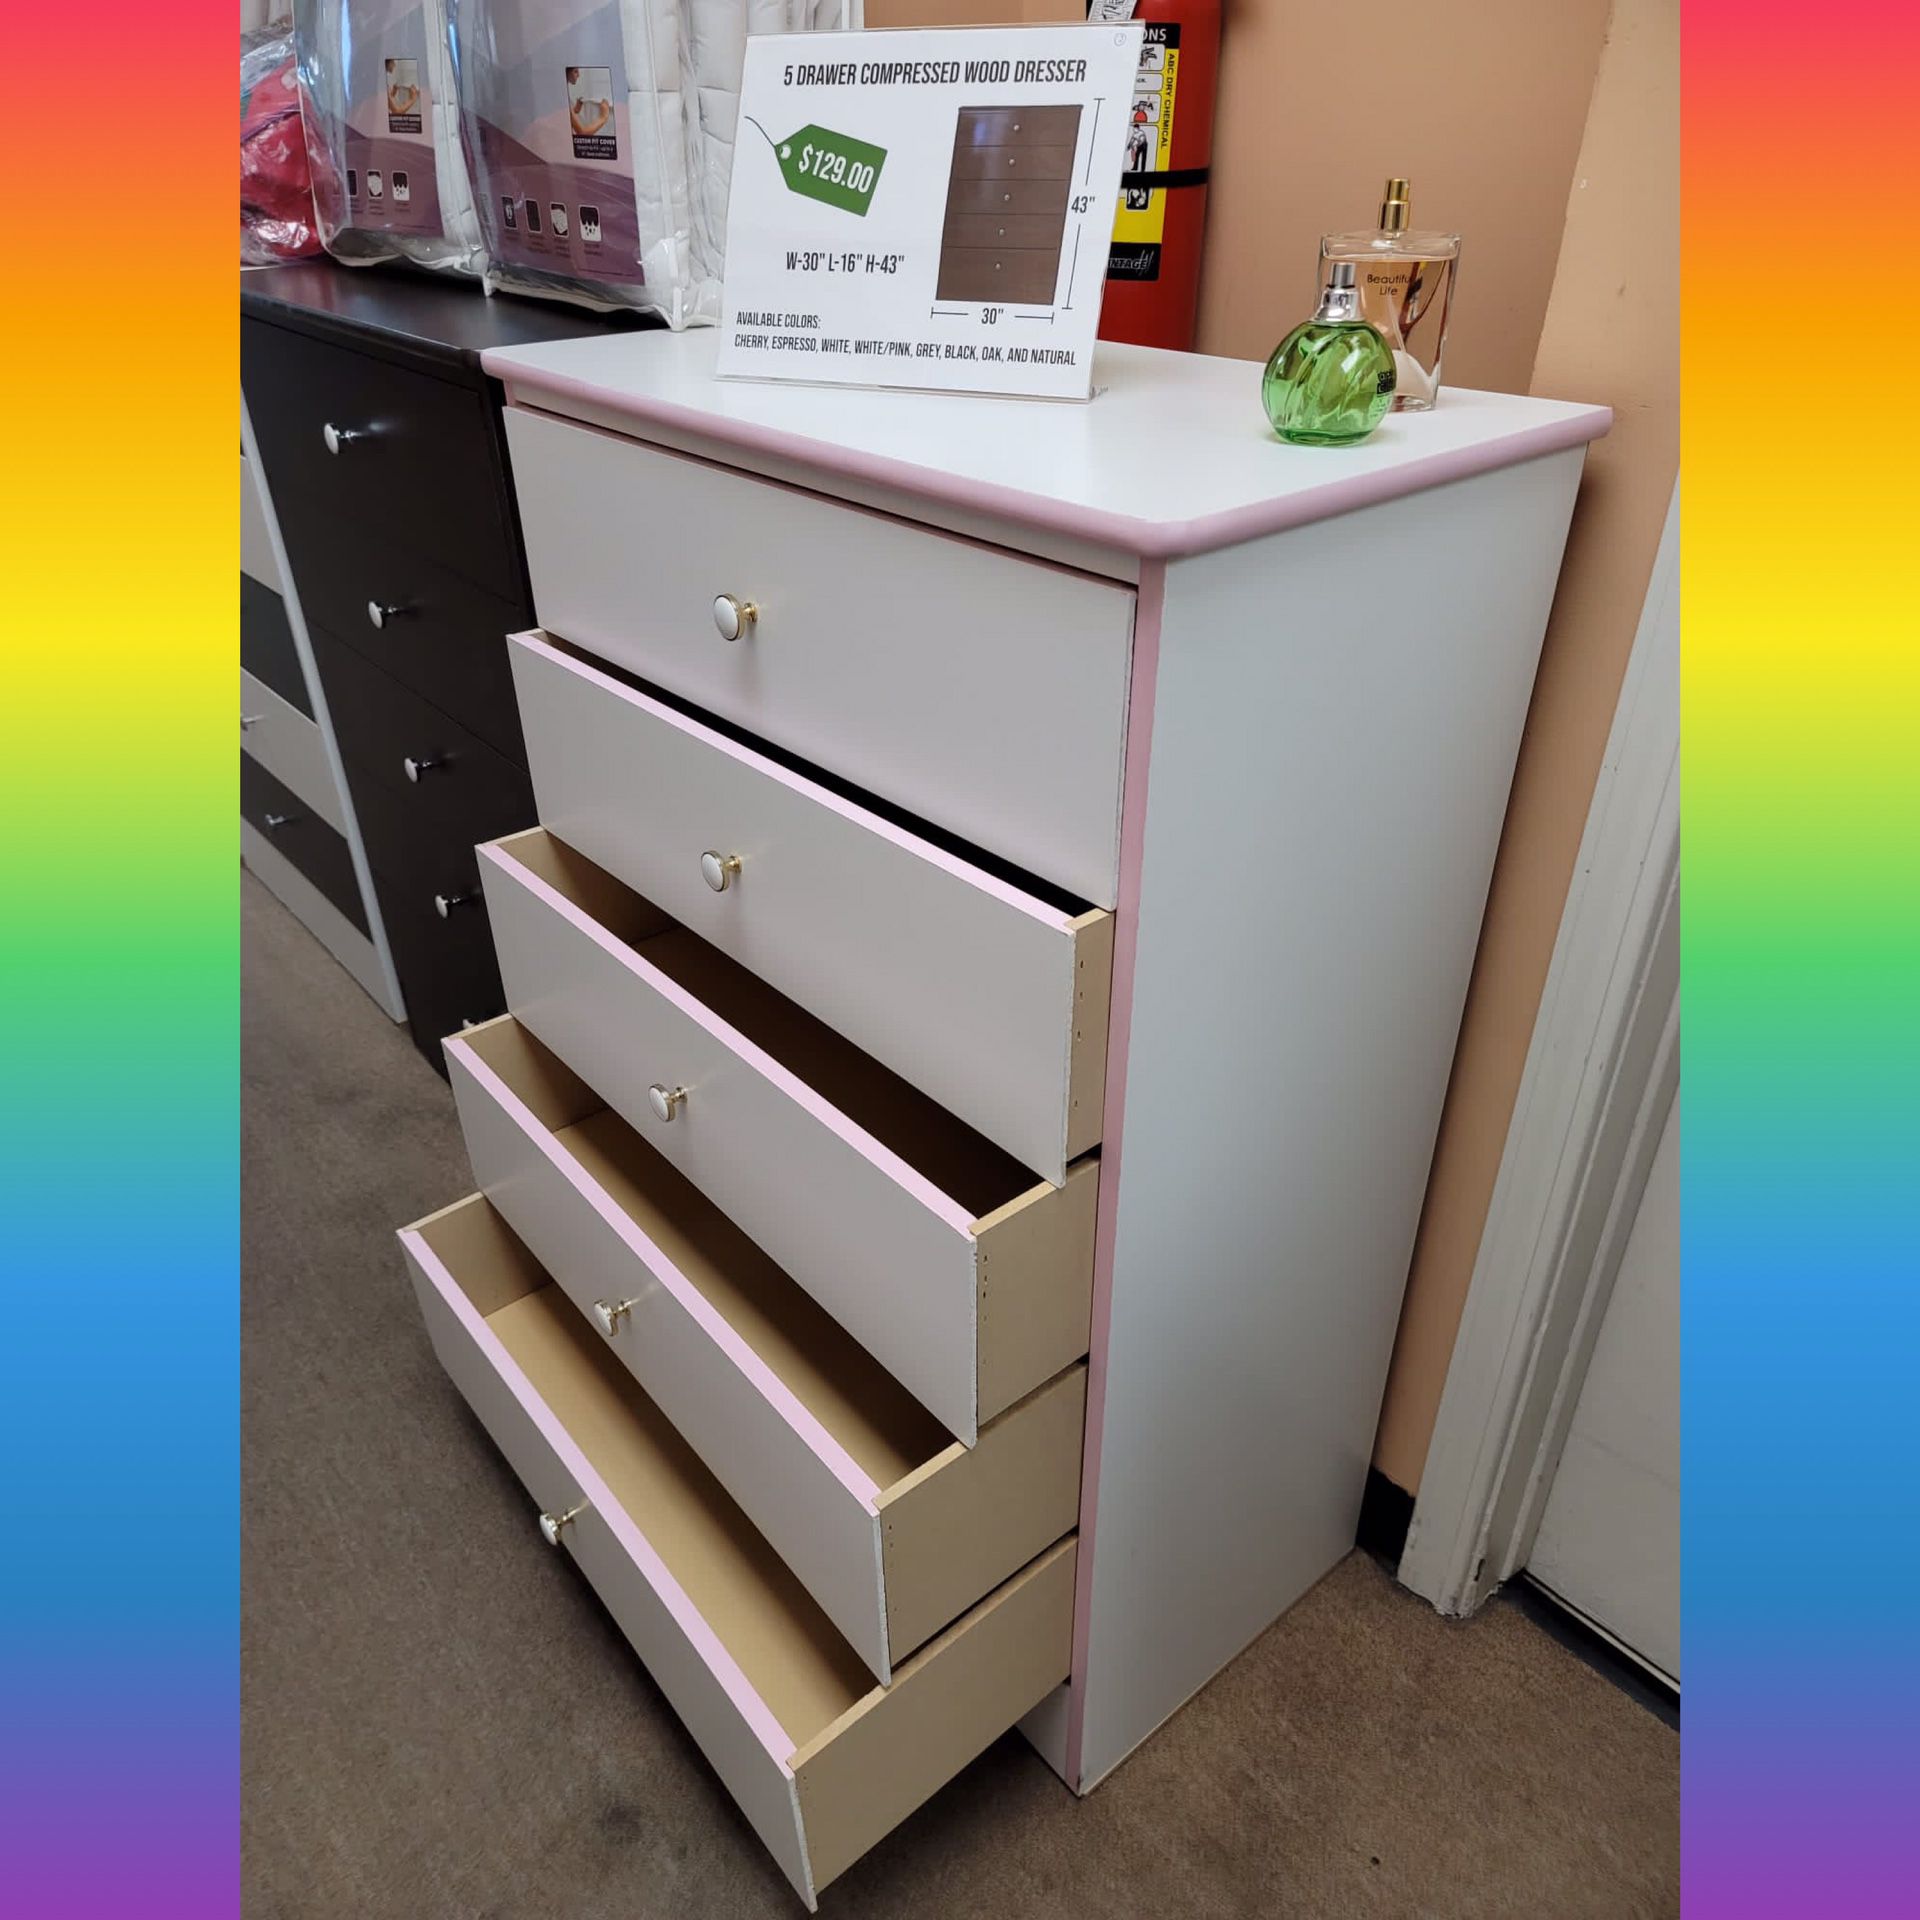 Compress Wood Dresser $129  Ready To Use 